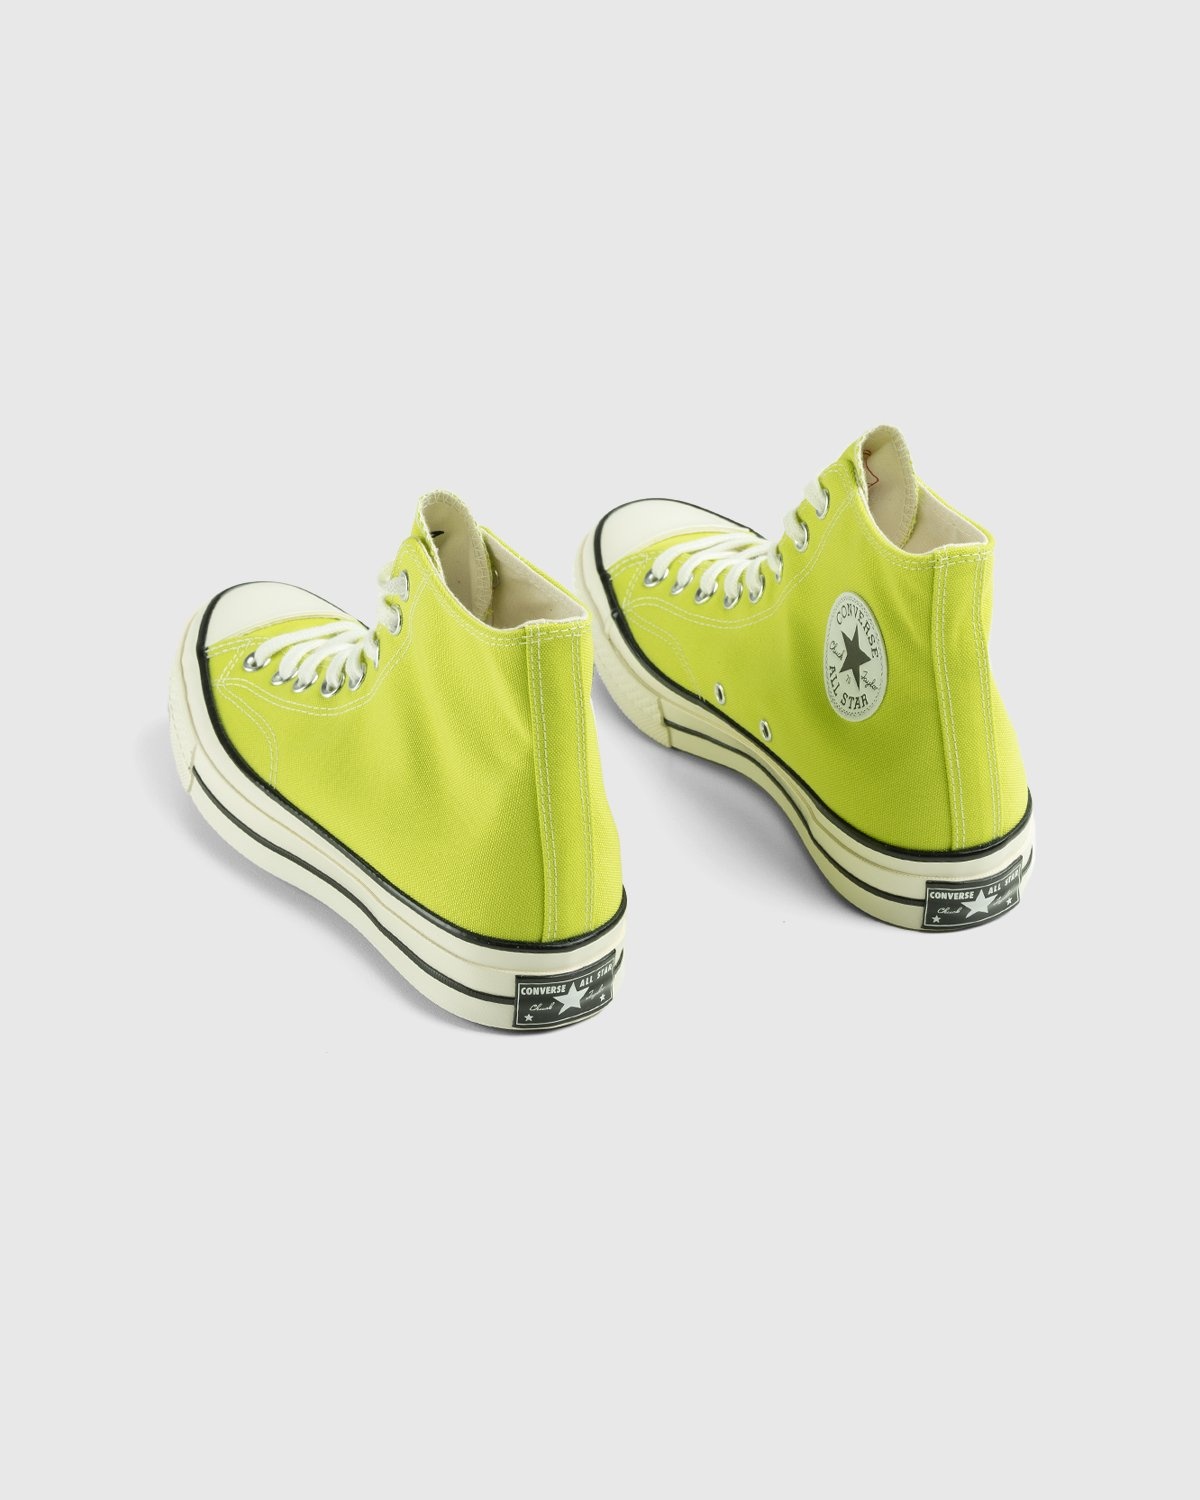 Converse – Chuck 70 Lime Twist Egret Black - High Top Sneakers - Yellow - Image 4